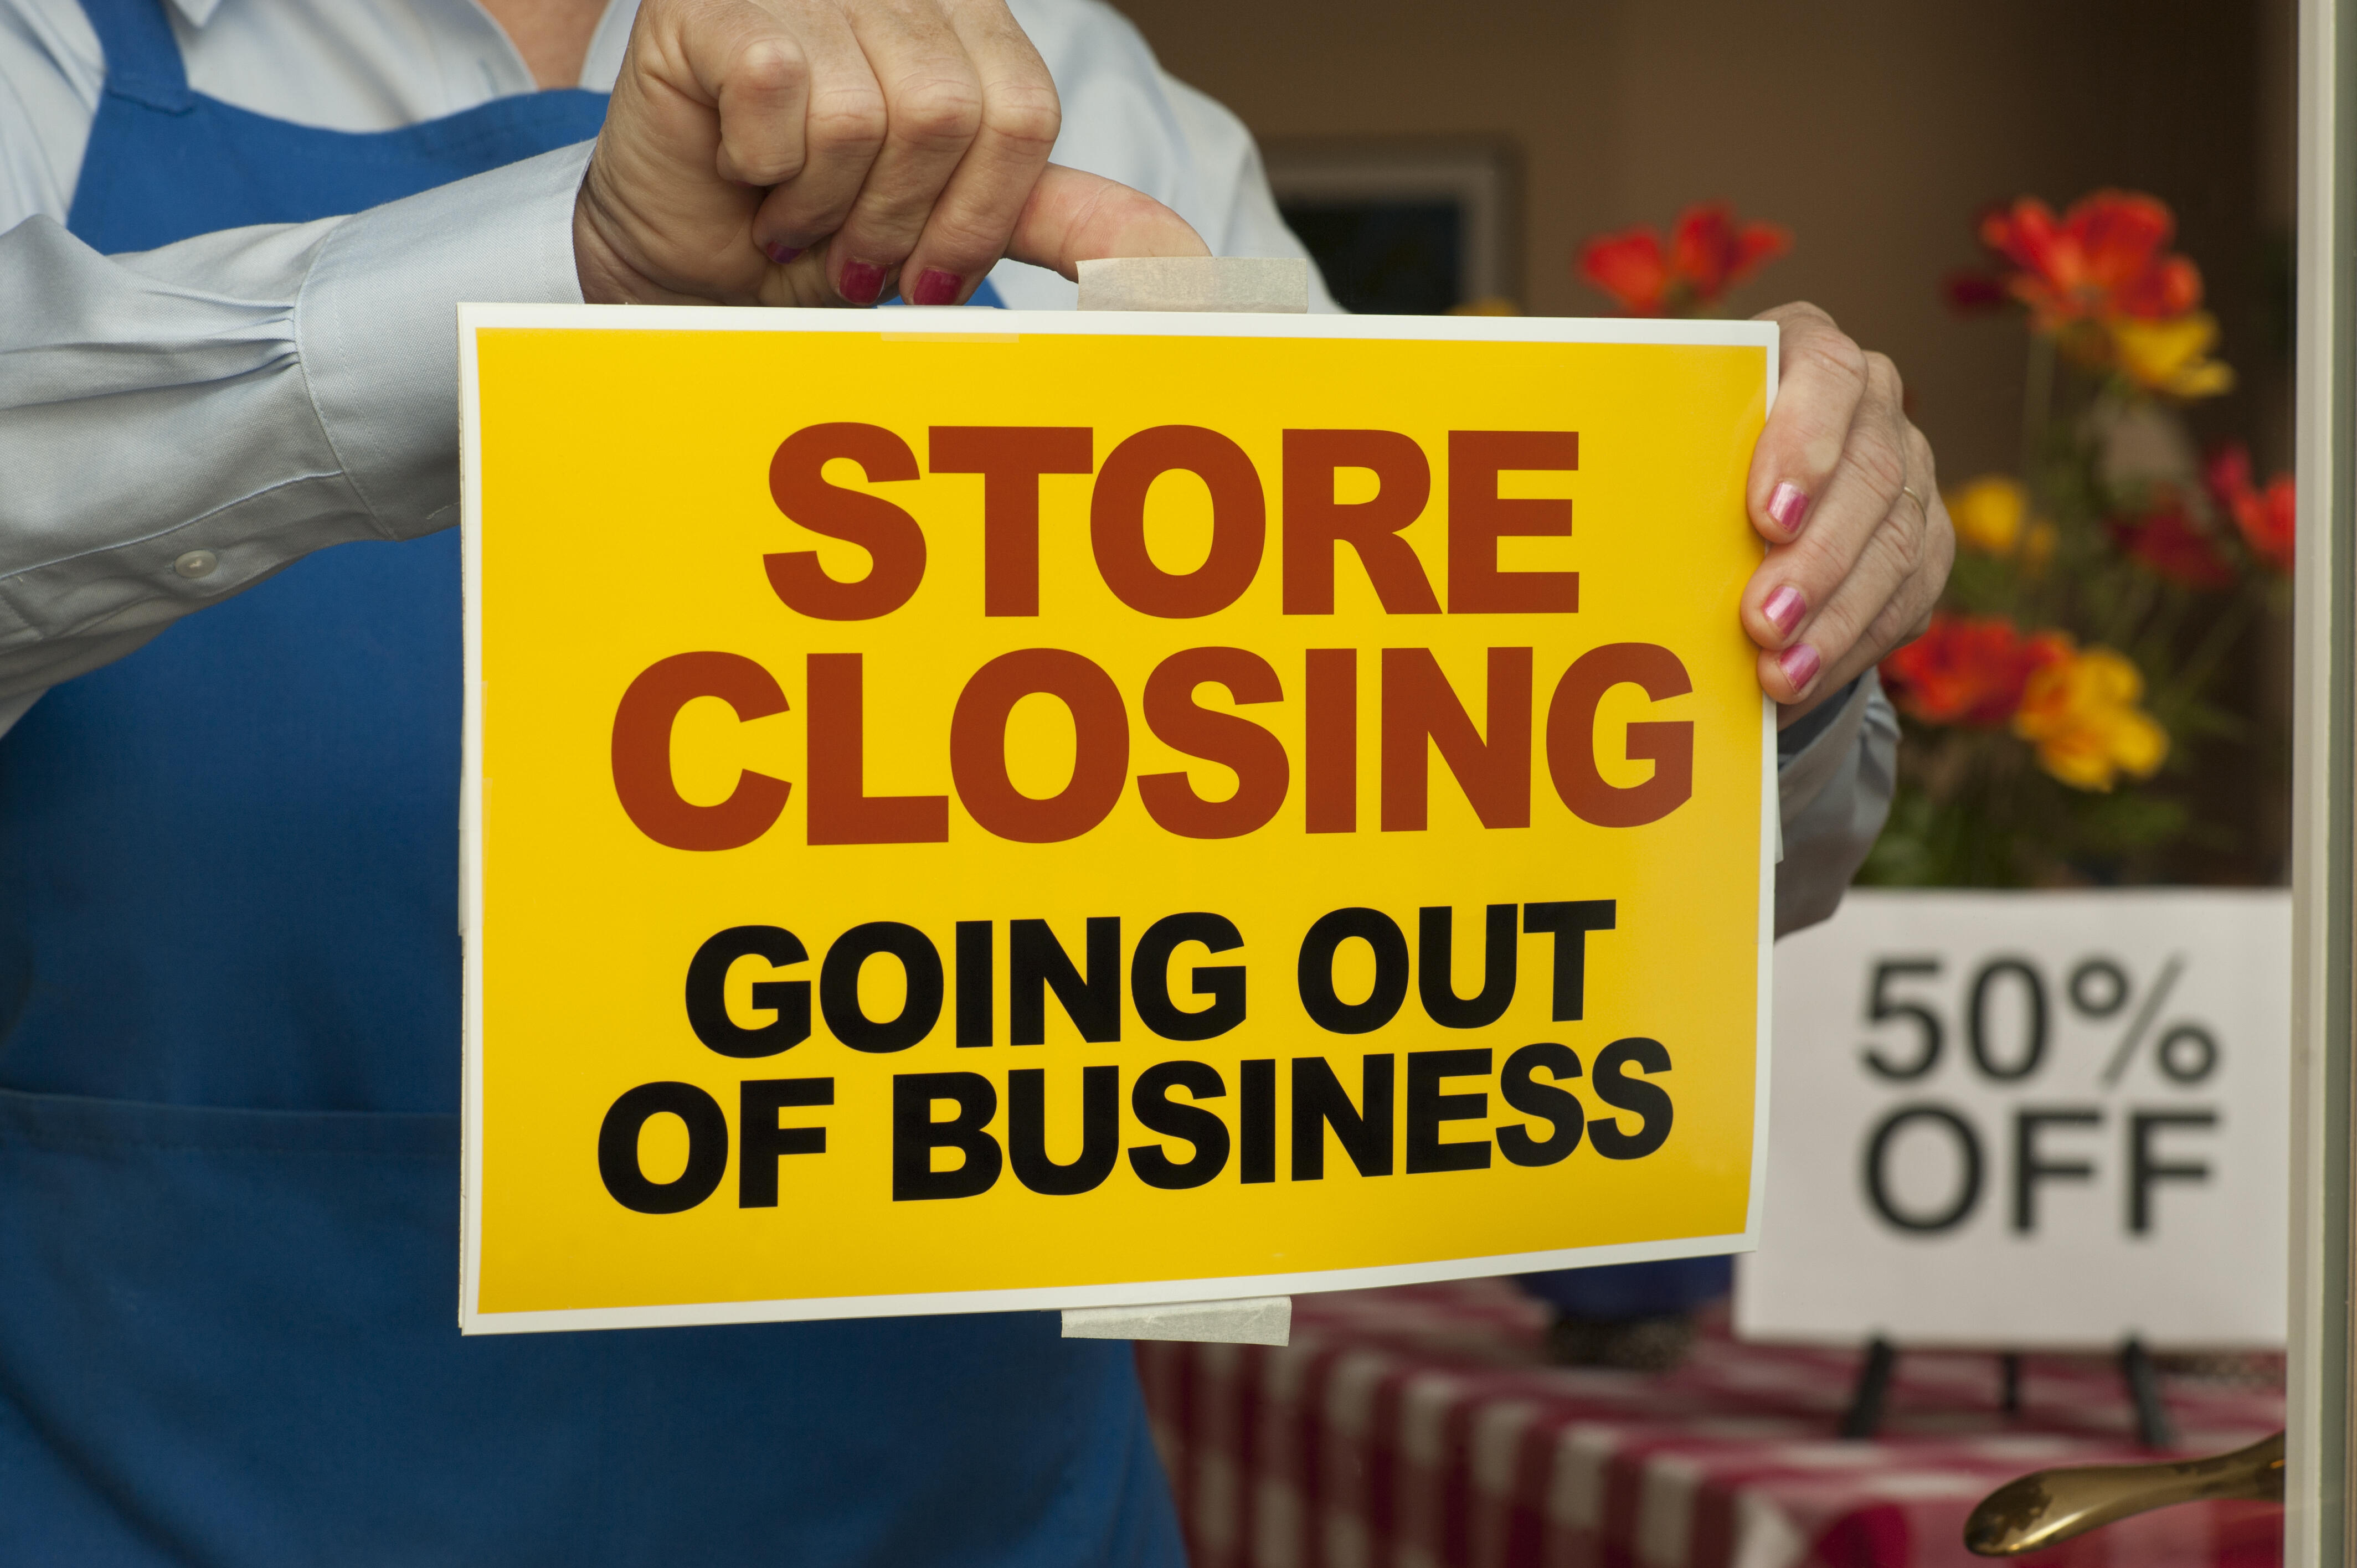 Close company. Going out of Business. Close Business. The Store is closed. Go out of Business.